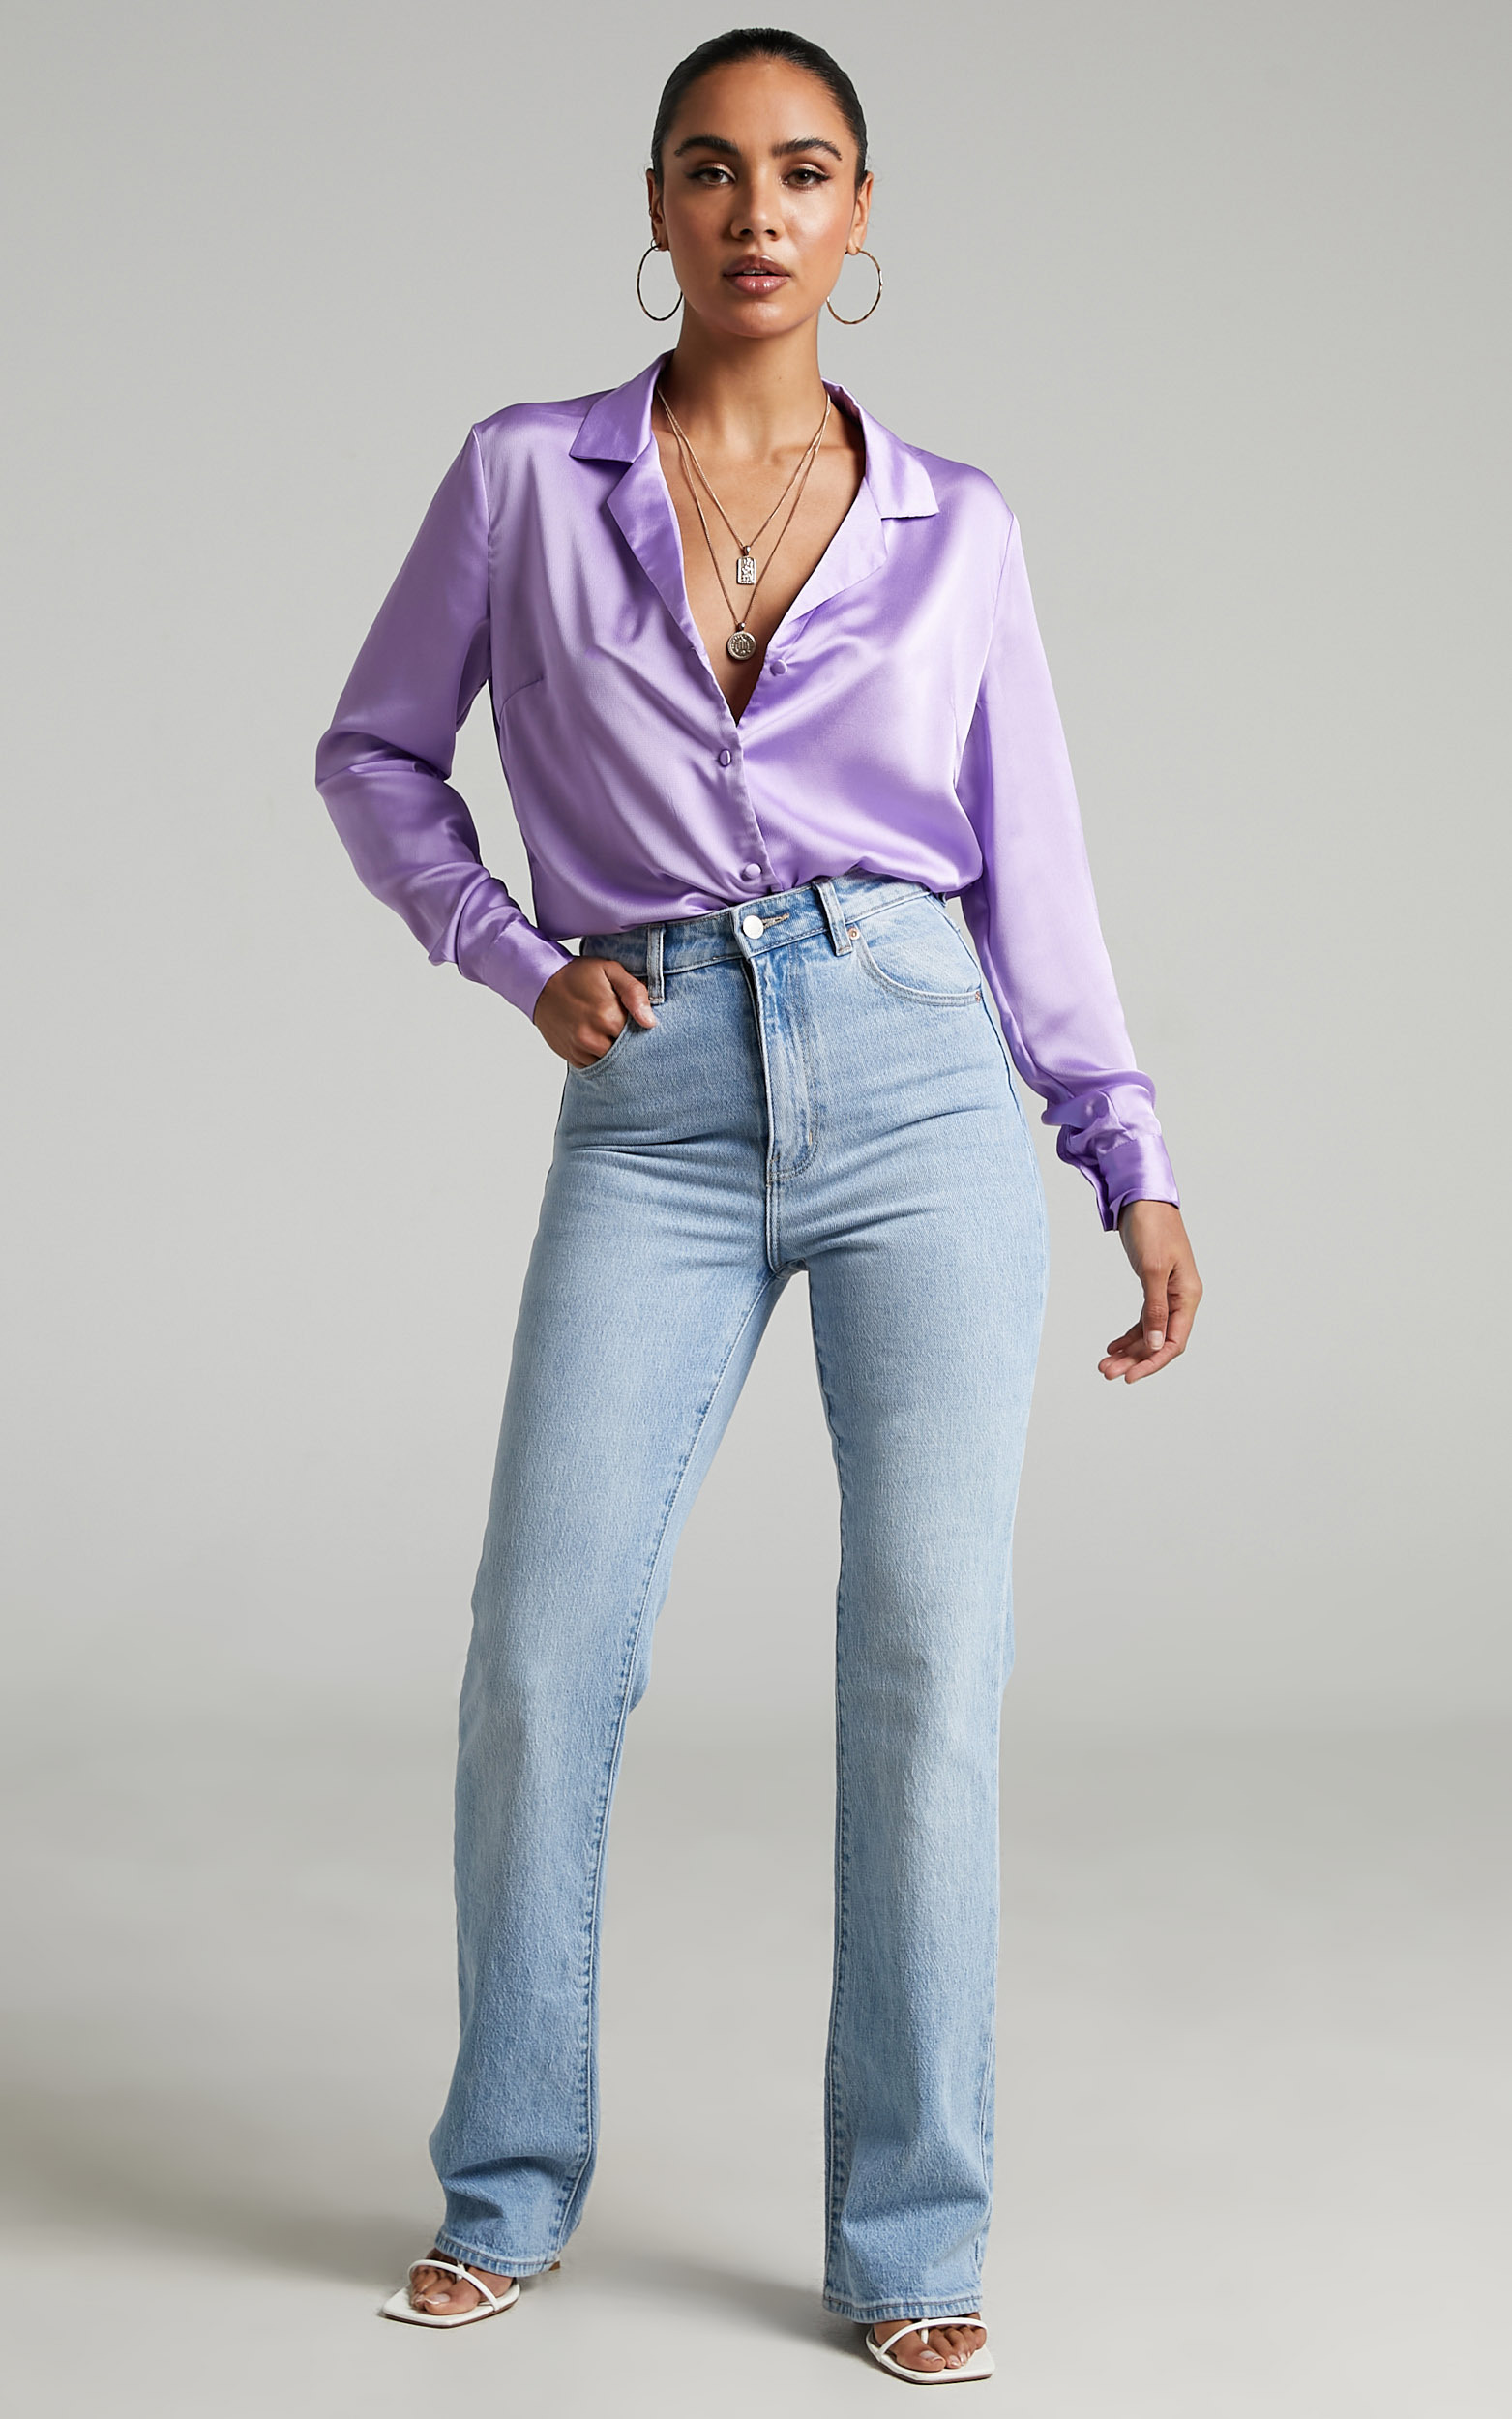 Tinna Longsleeve Satin Collared Button Up Shirt in Lilac - 06, PRP2, hi-res image number null